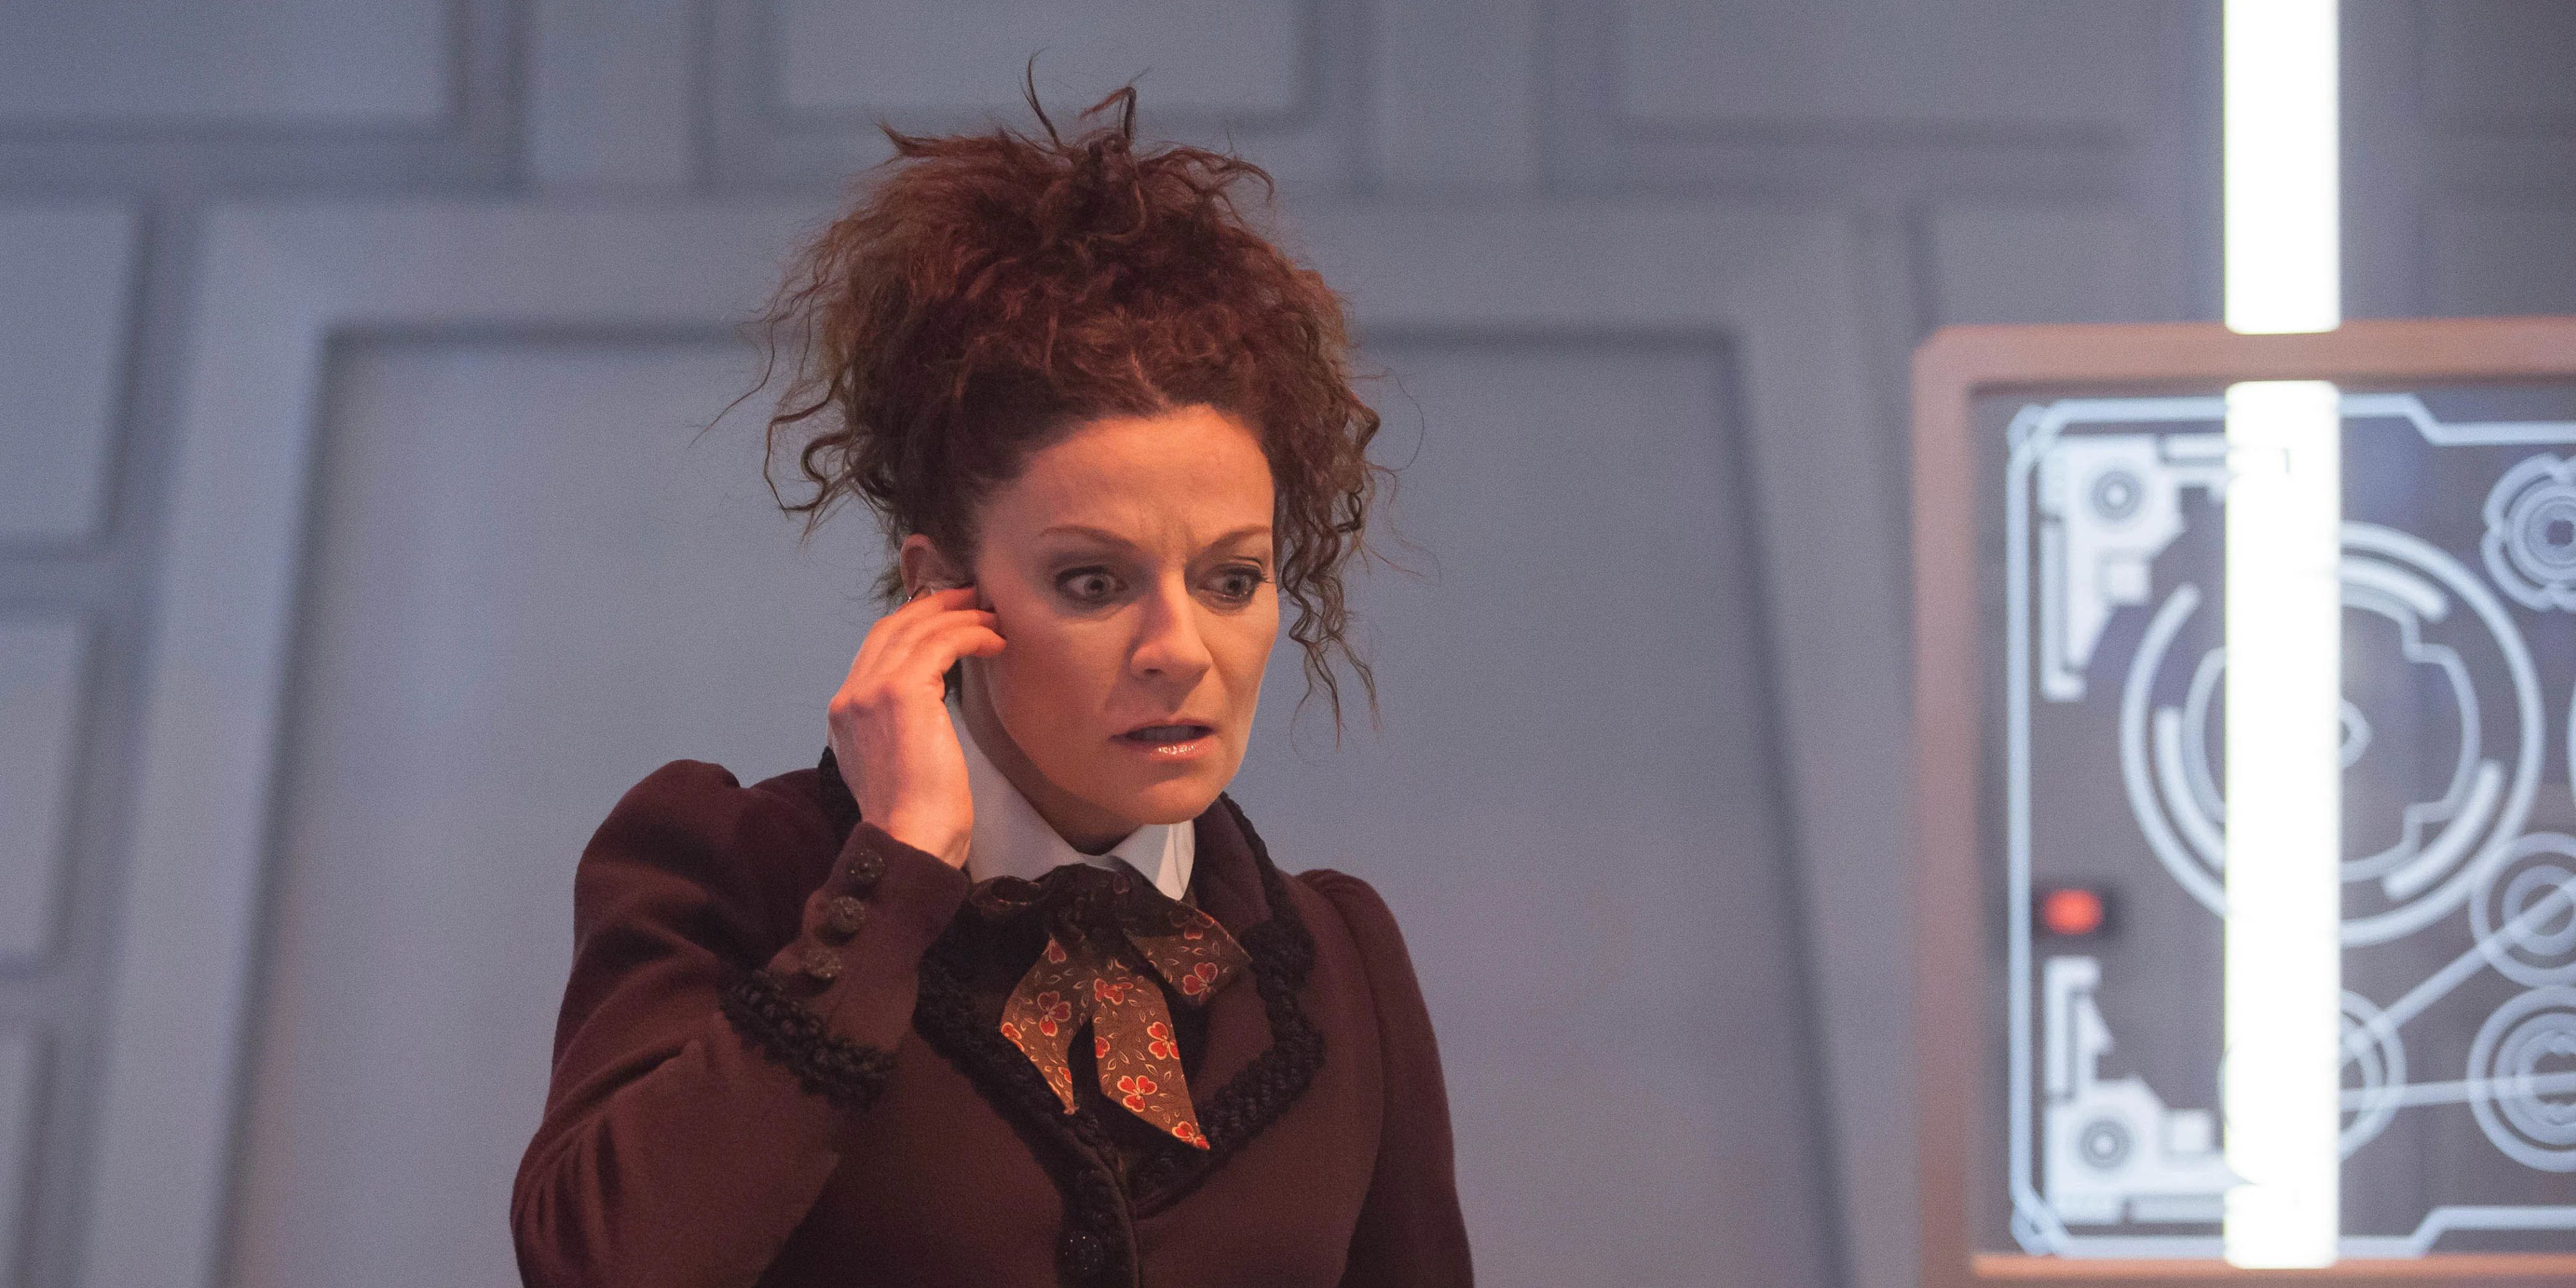 Michelle Gomez as Missy in Doctor Who with her hand to her ear